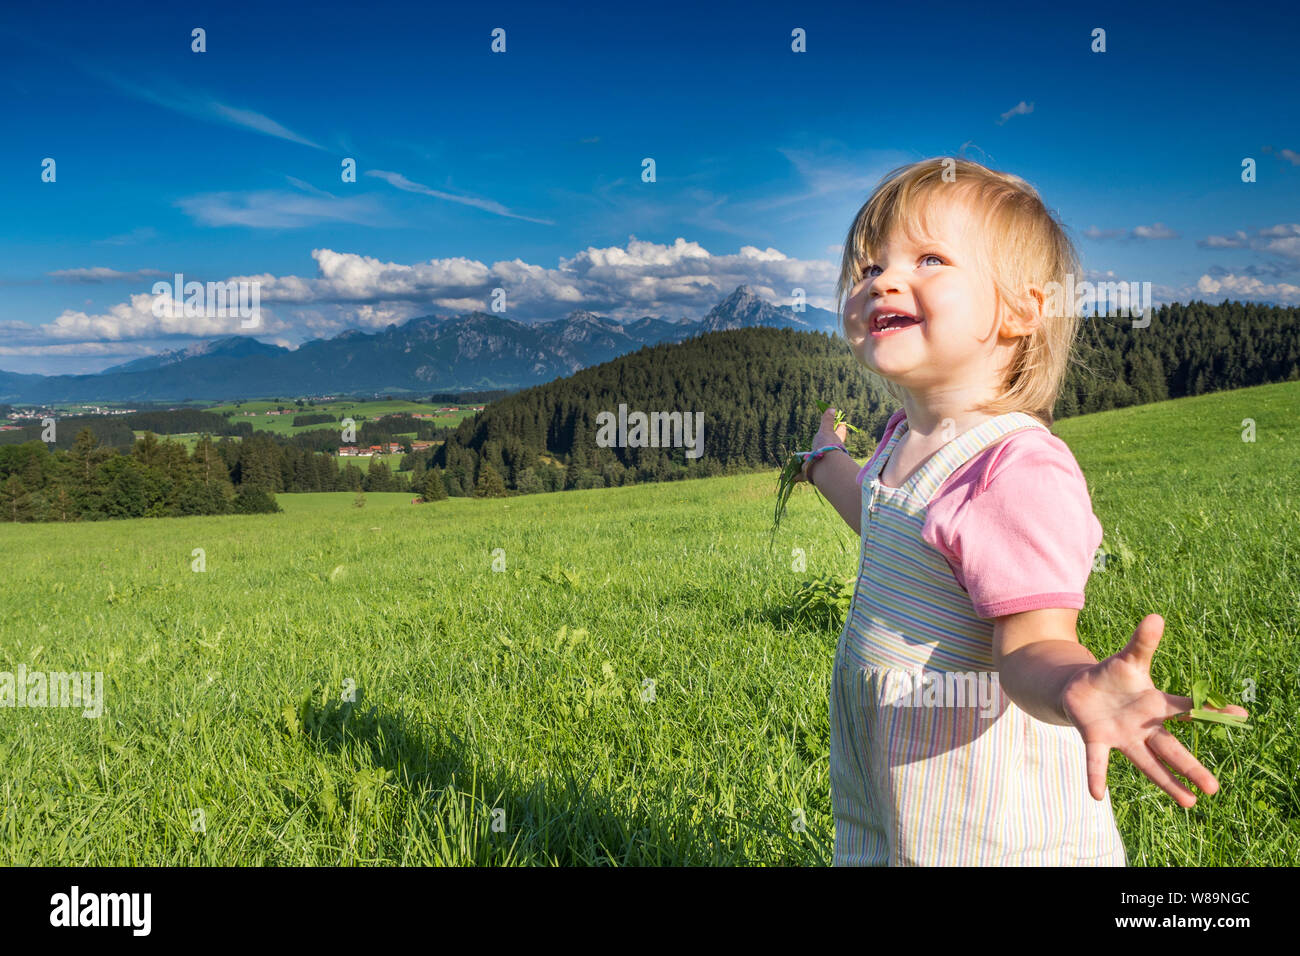 Germany, Bavaria, Allgaeu, happy baby girl playing in the fields Stock Photo